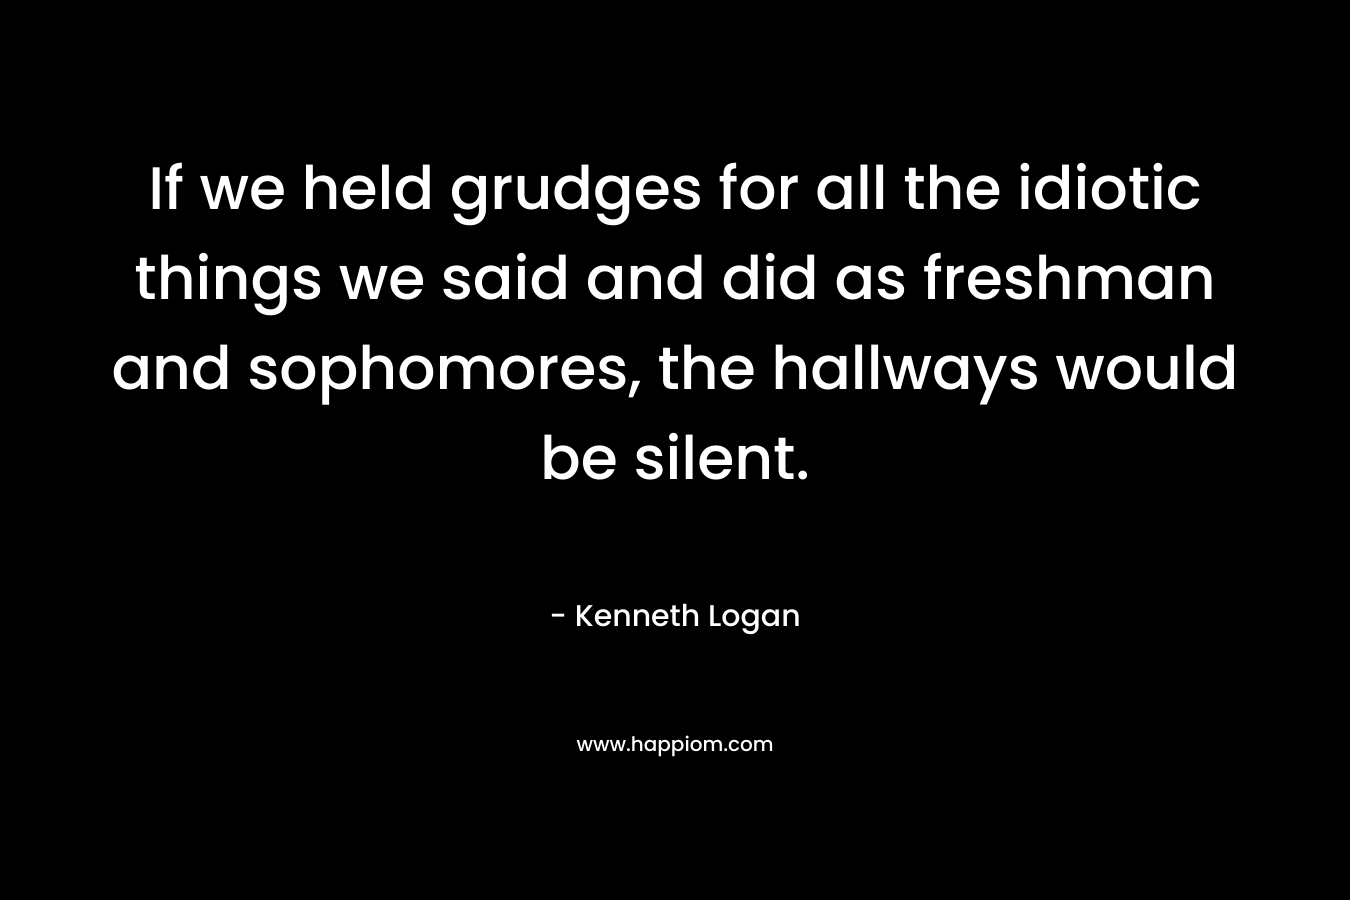 If we held grudges for all the idiotic things we said and did as freshman and sophomores, the hallways would be silent. – Kenneth Logan